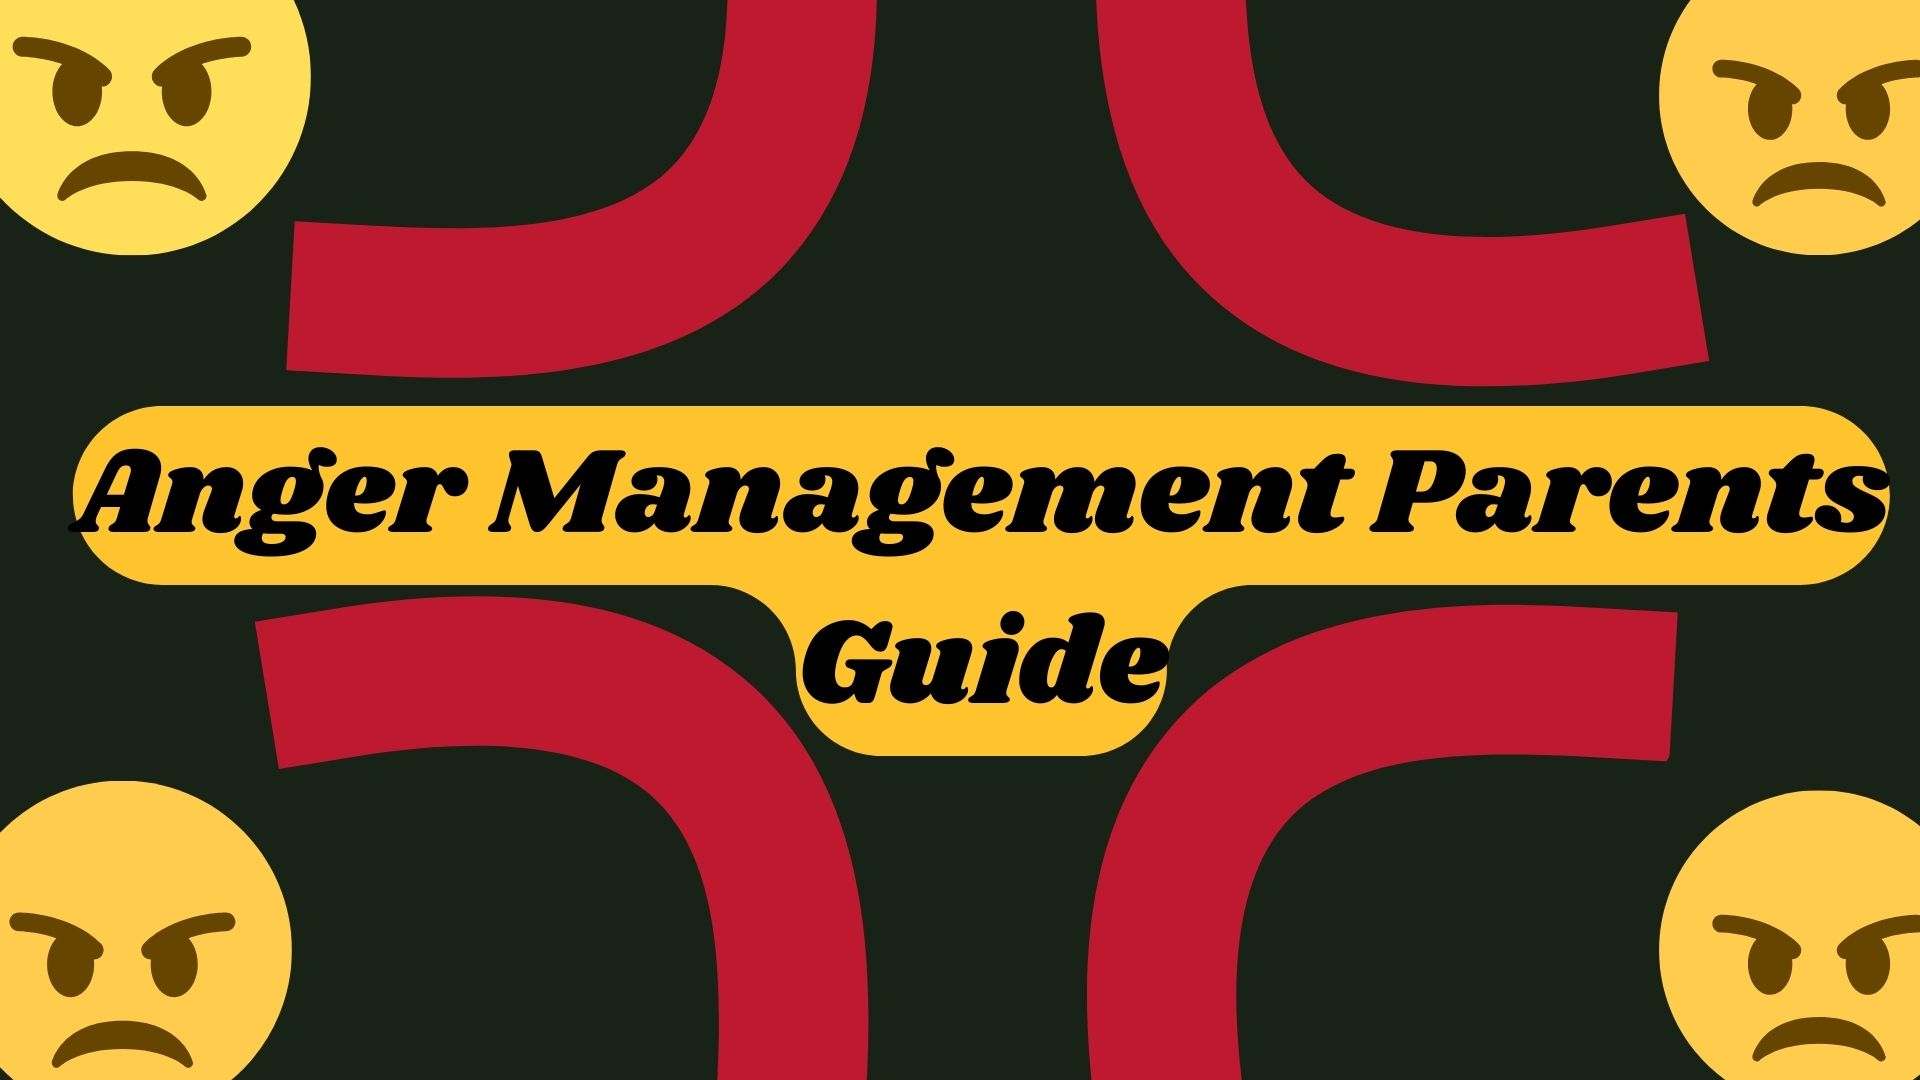 Anger Management Parents Guide wallpaper and images